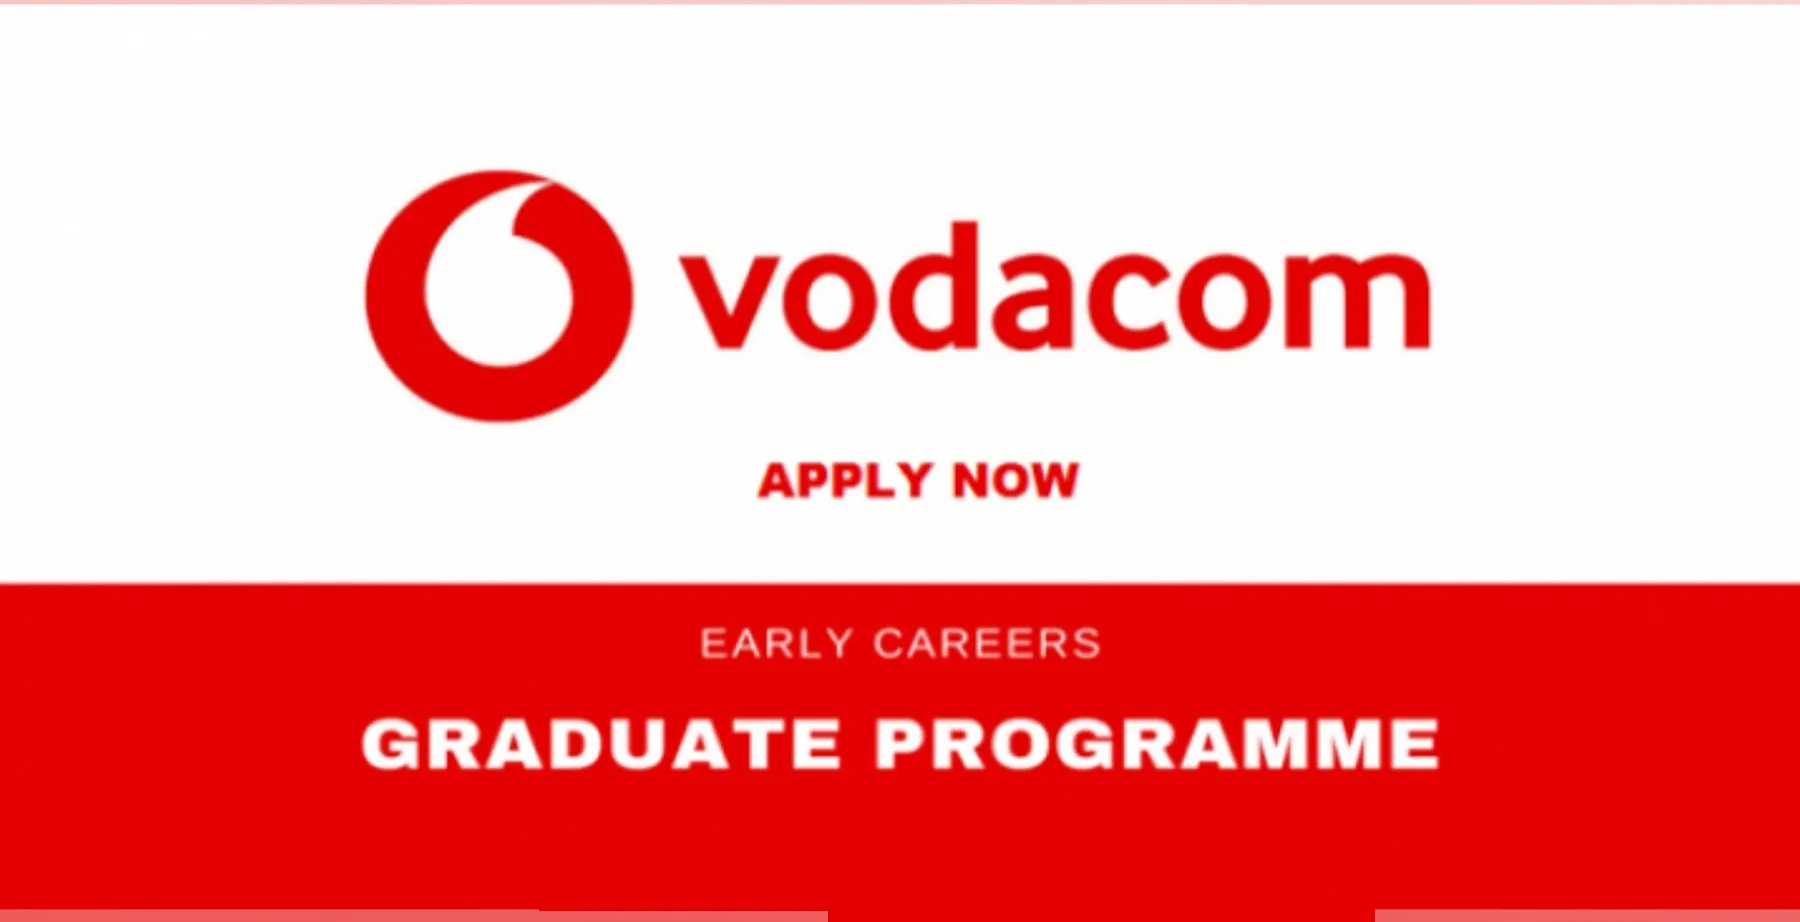 Vodacom Early Career Programme for Young Graduates